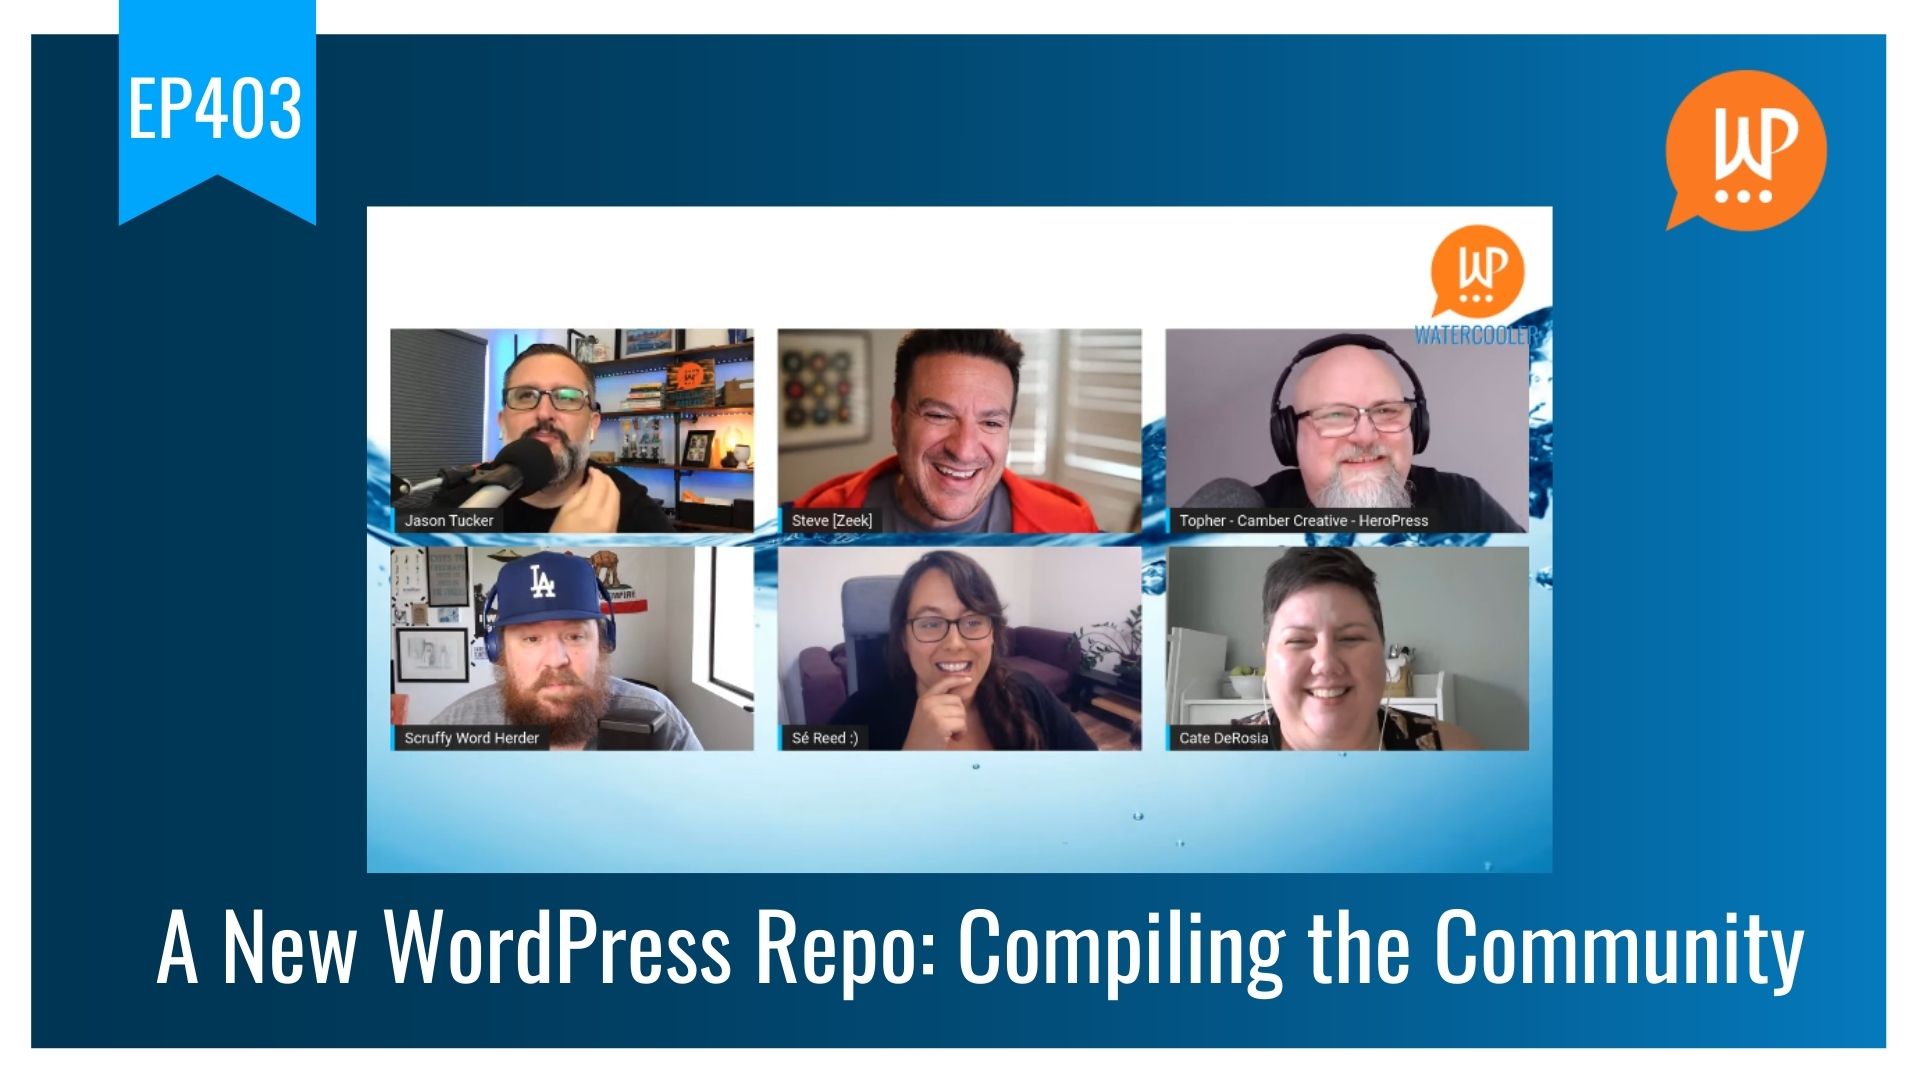 EP403 – A New WordPress Repo: Compiling the Community – WPwatercooler